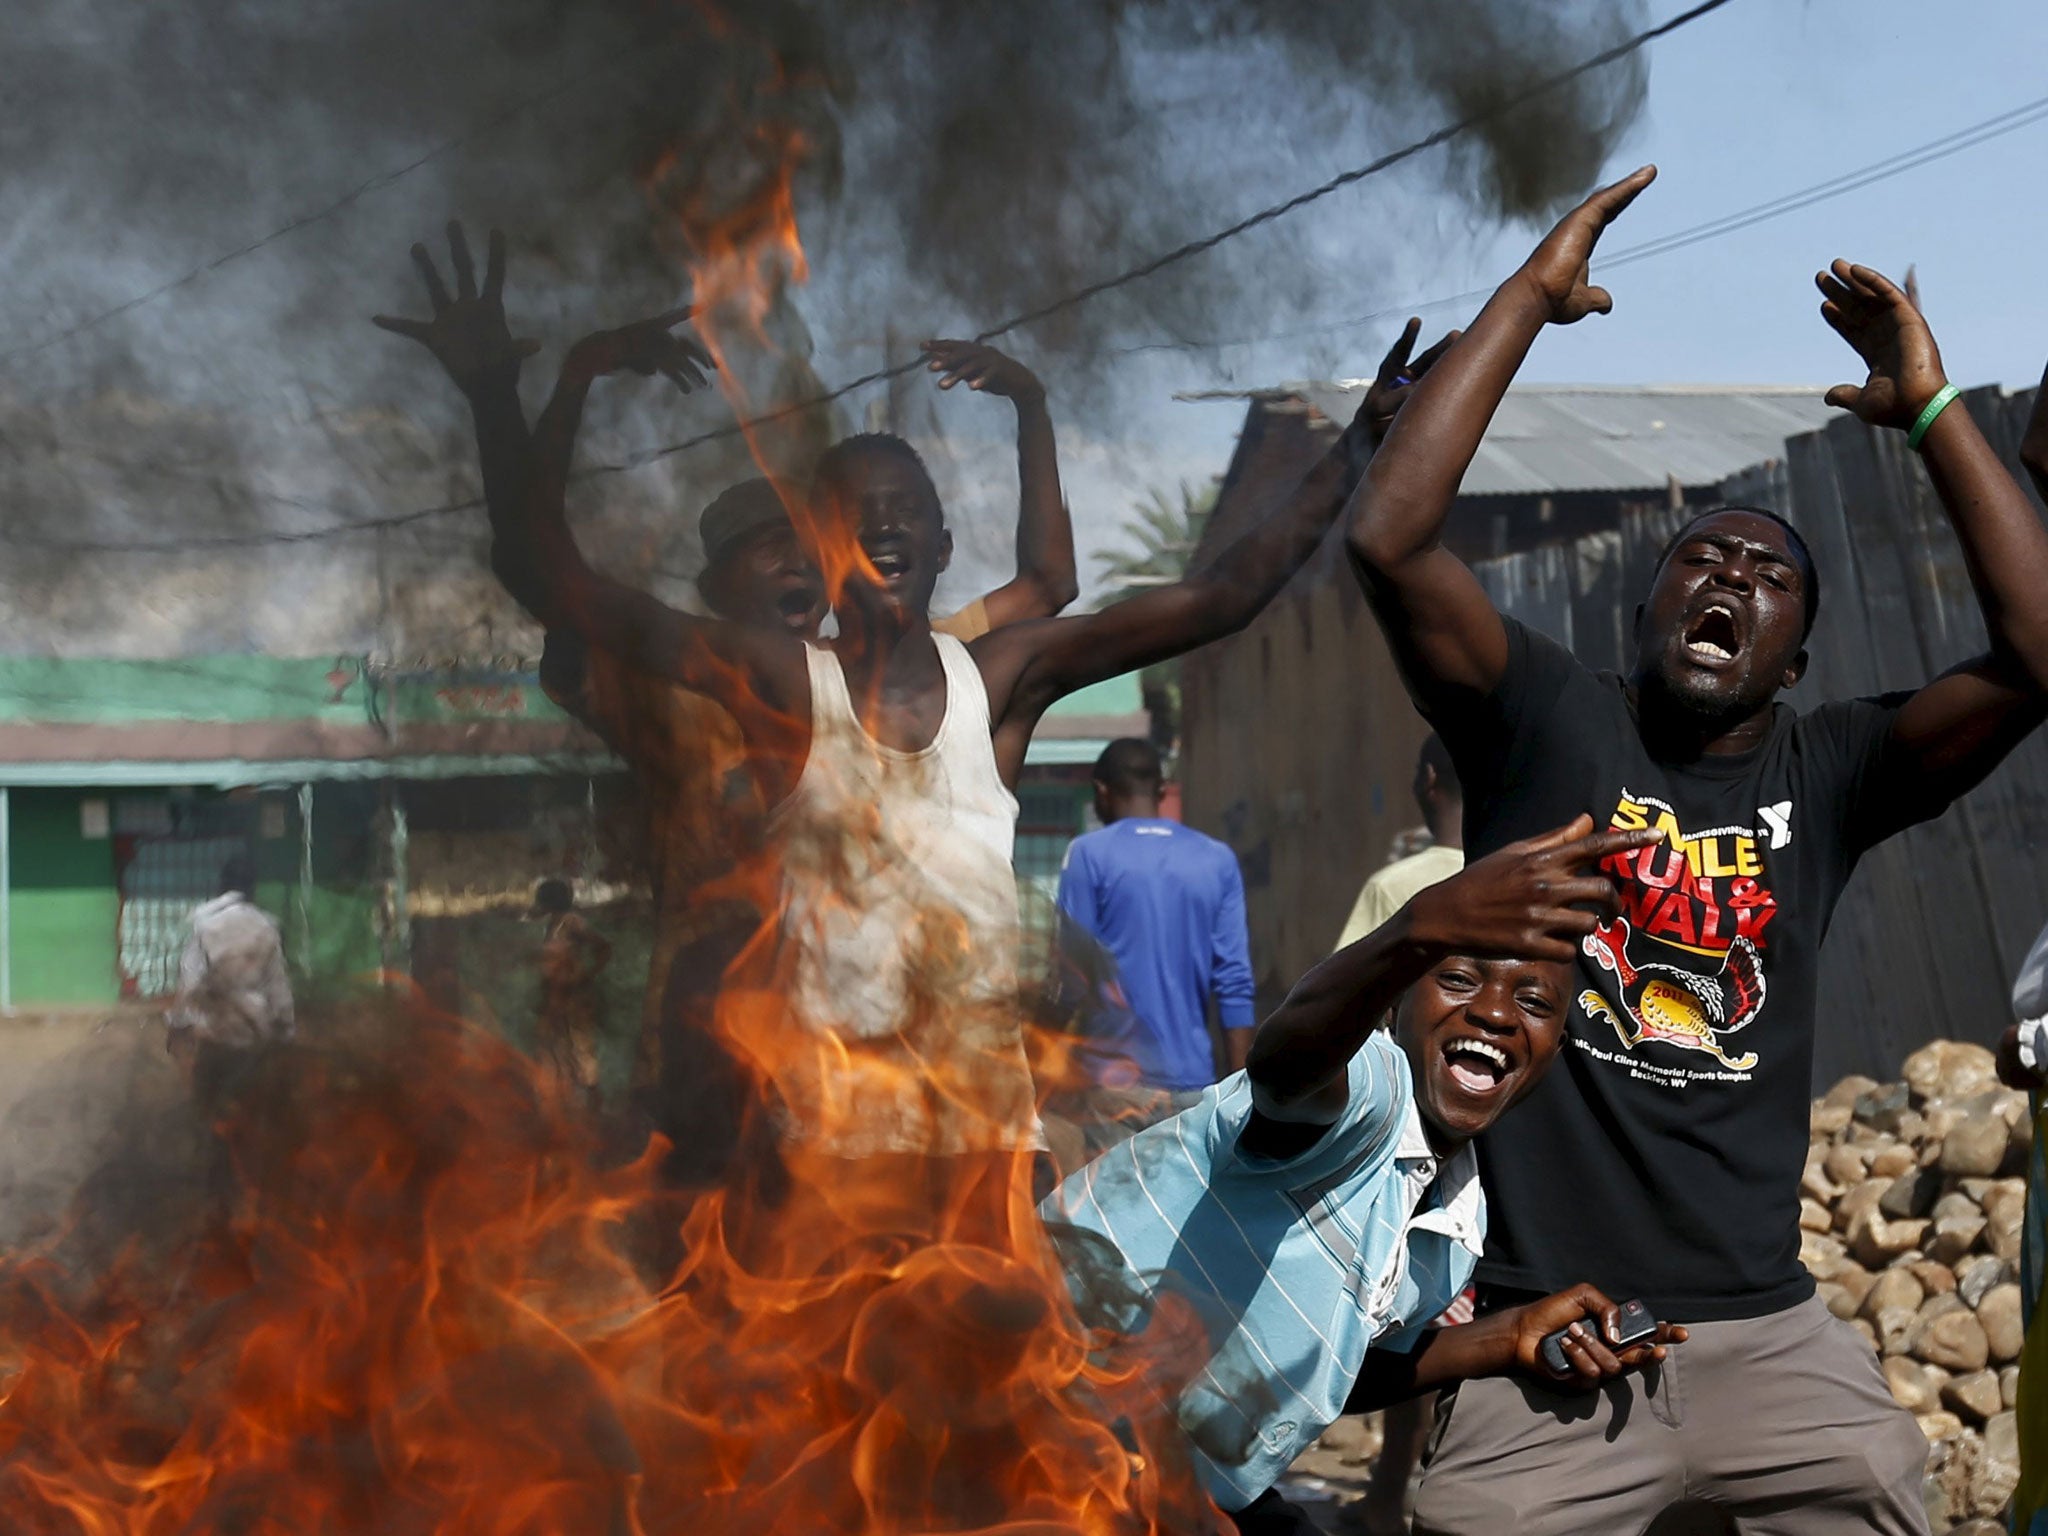 Protesters, who are opposed to President Pierre Nkurunziza’s decision to run for a third term, gesture in front of a burning barricade in Bujumbura, Burundi